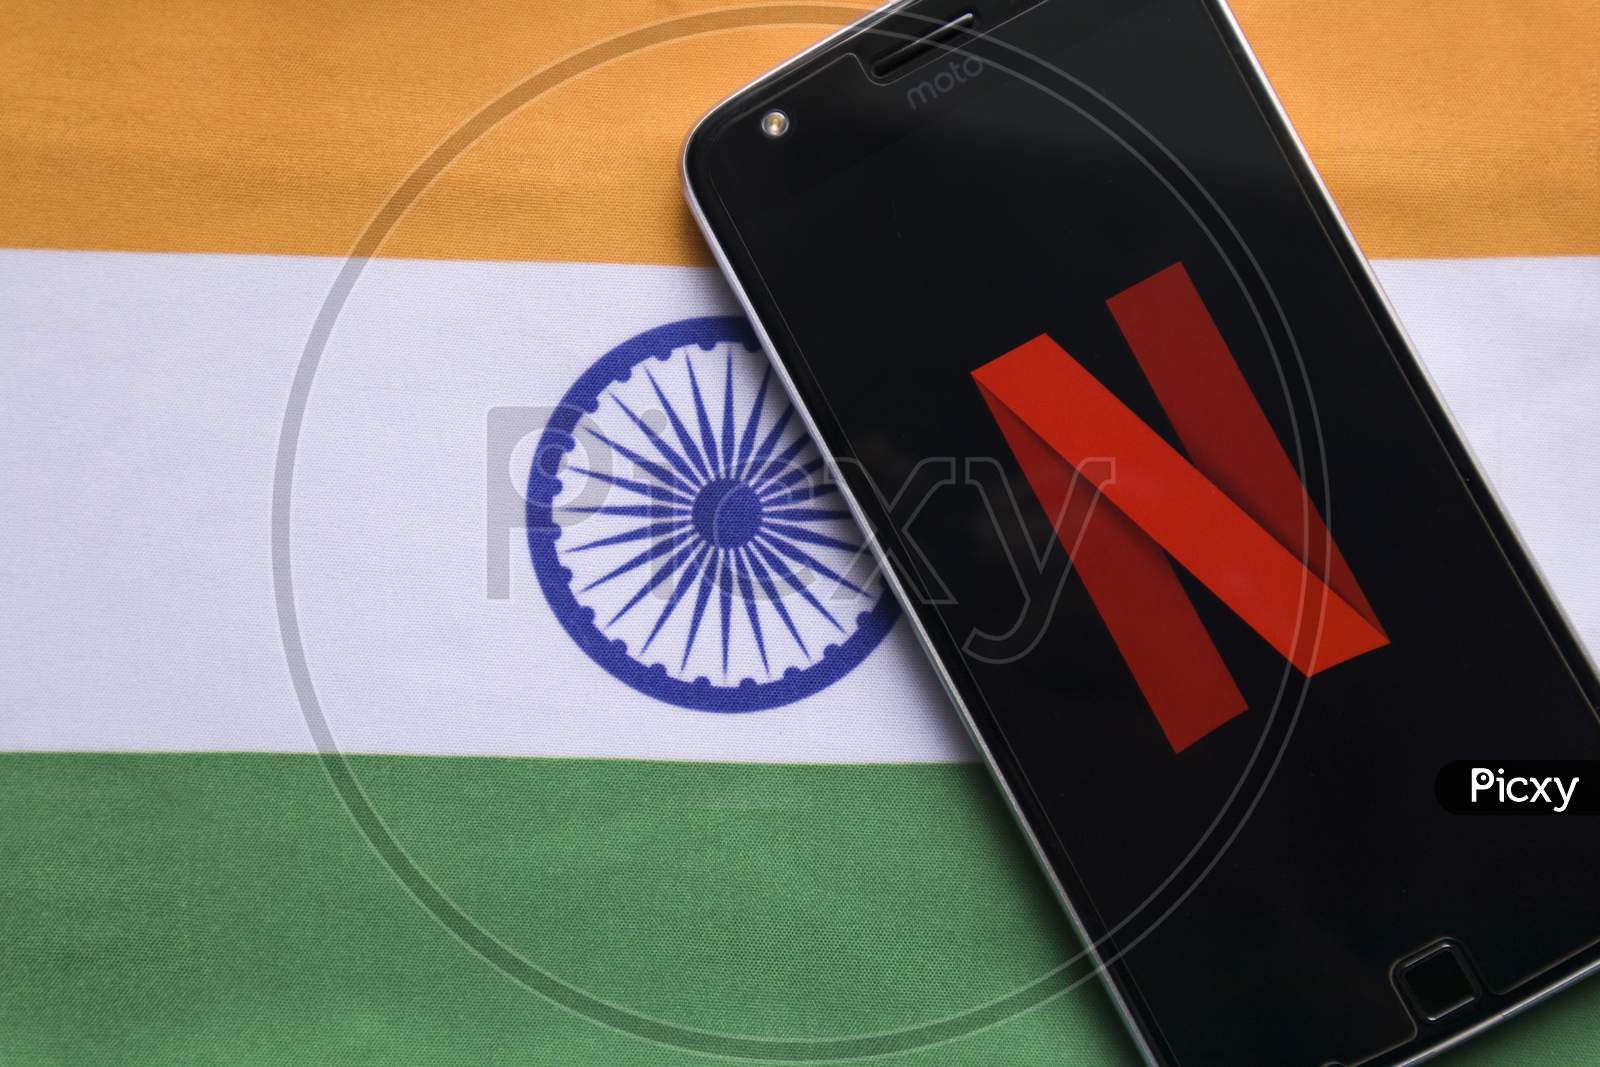 Netflix Logo On Mobile With Indian  Flag As Background.